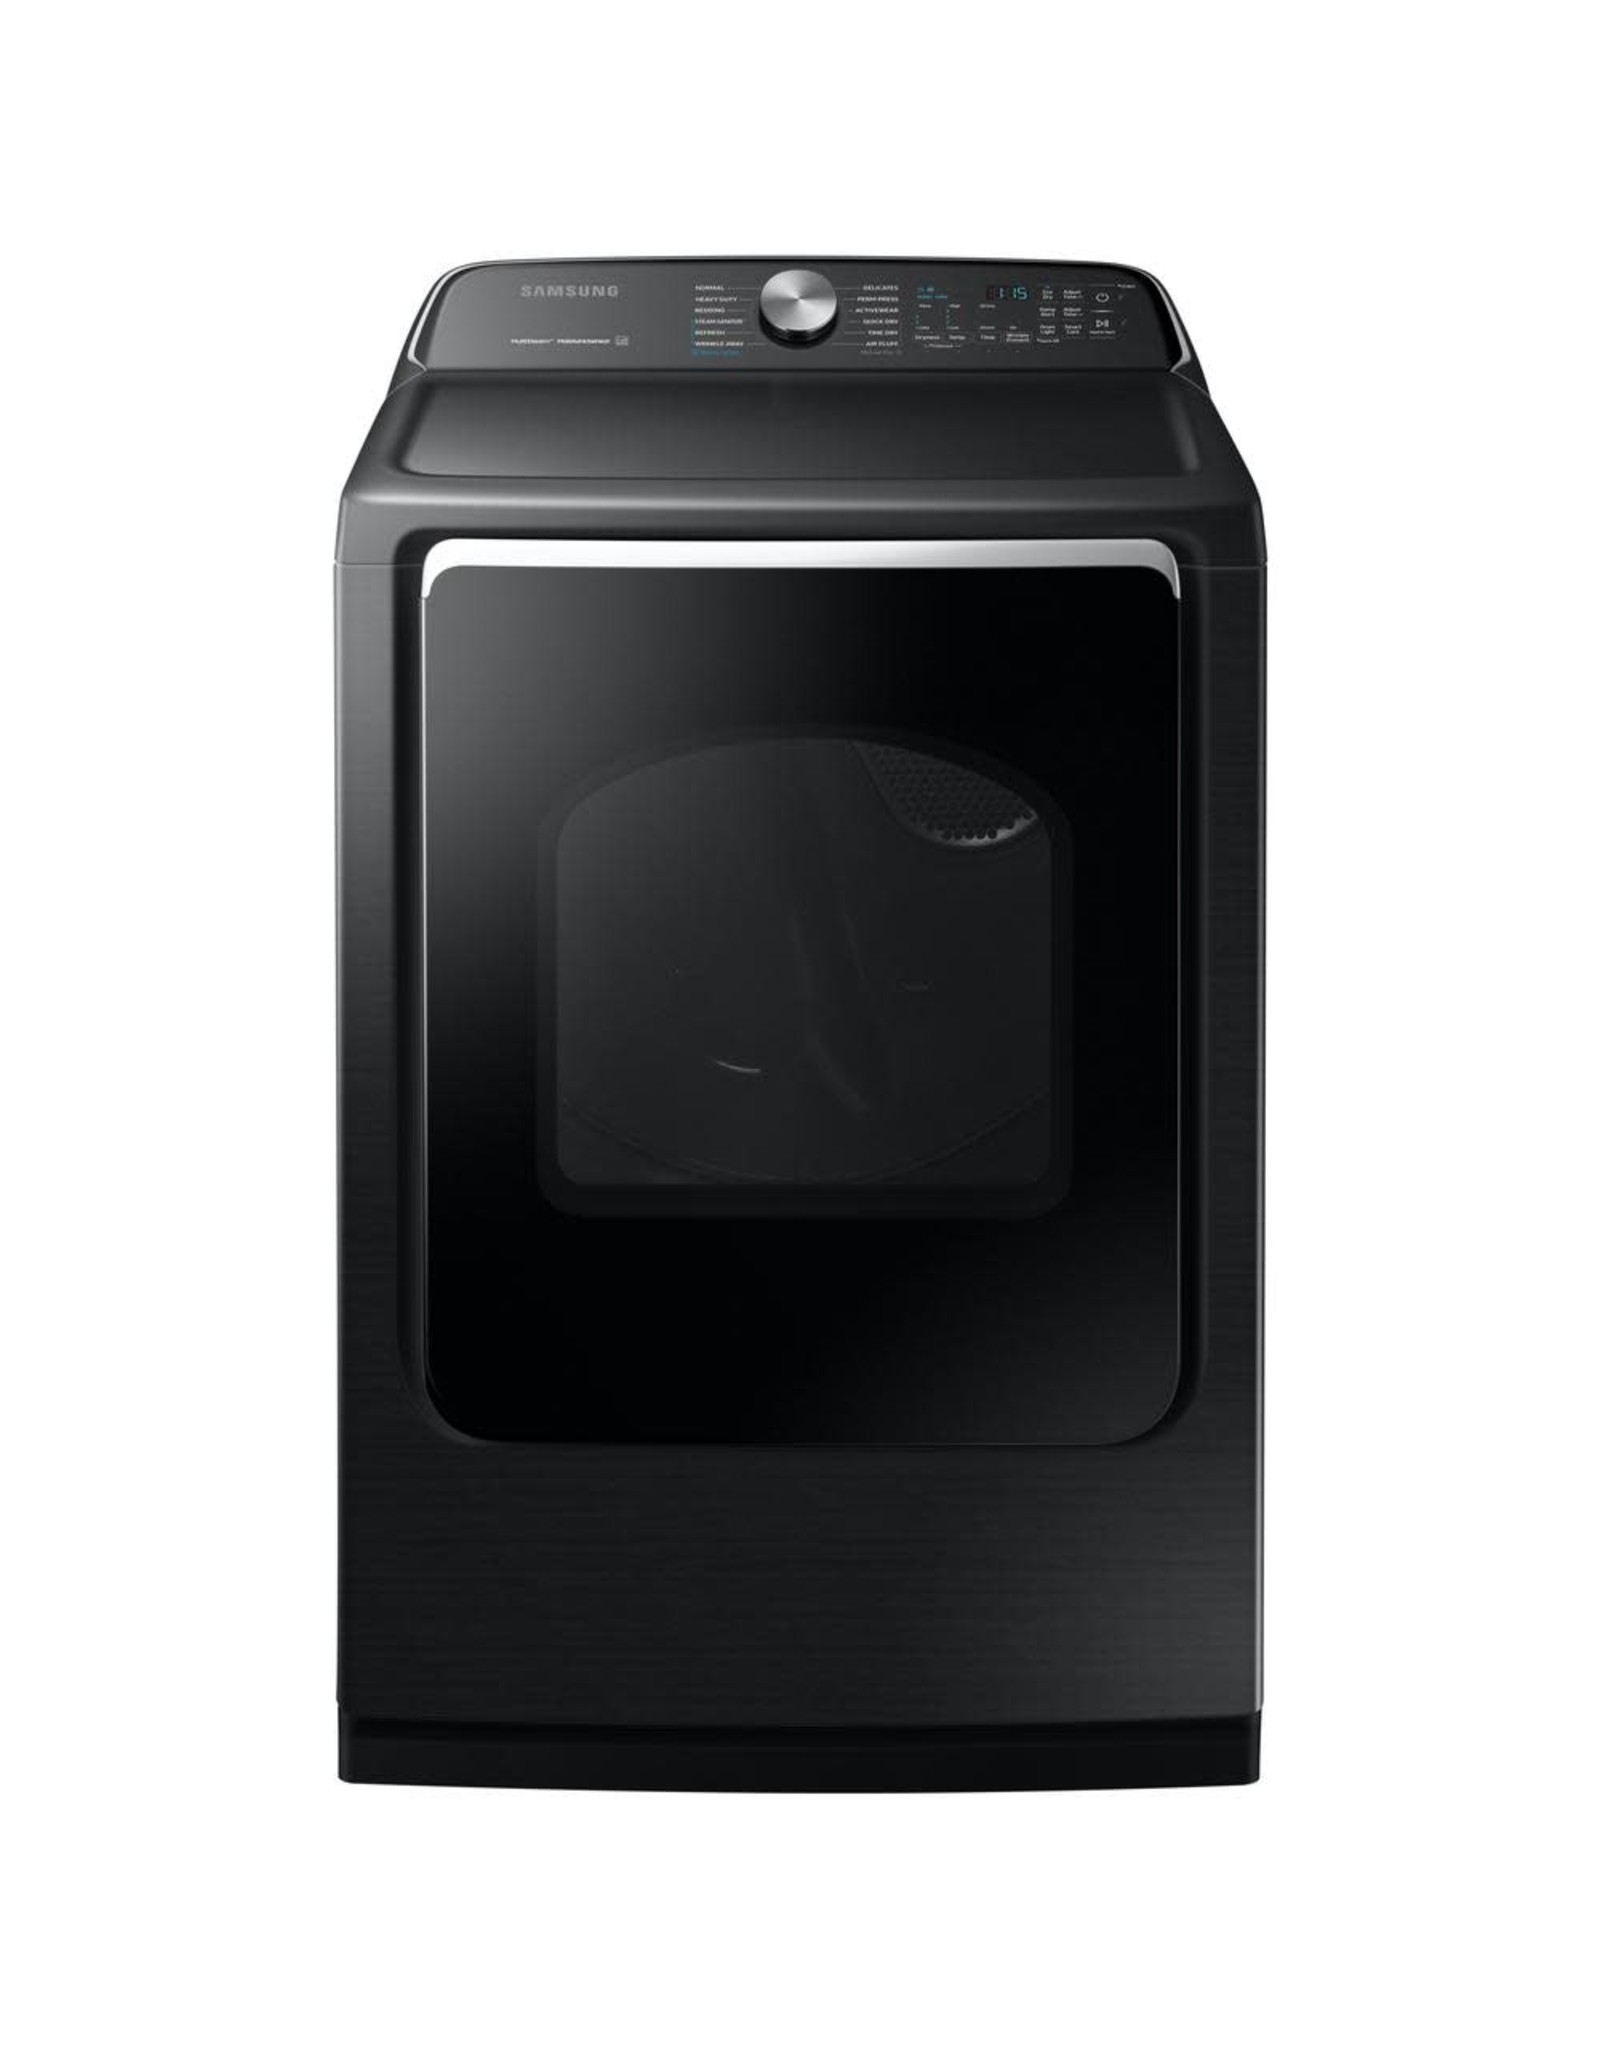 SAMSUNG Samsung 7.4 cu. ft. 240-Volt Black Stainless Steel Electric Dryer with Steam Sanitize+, ENERGY STAR